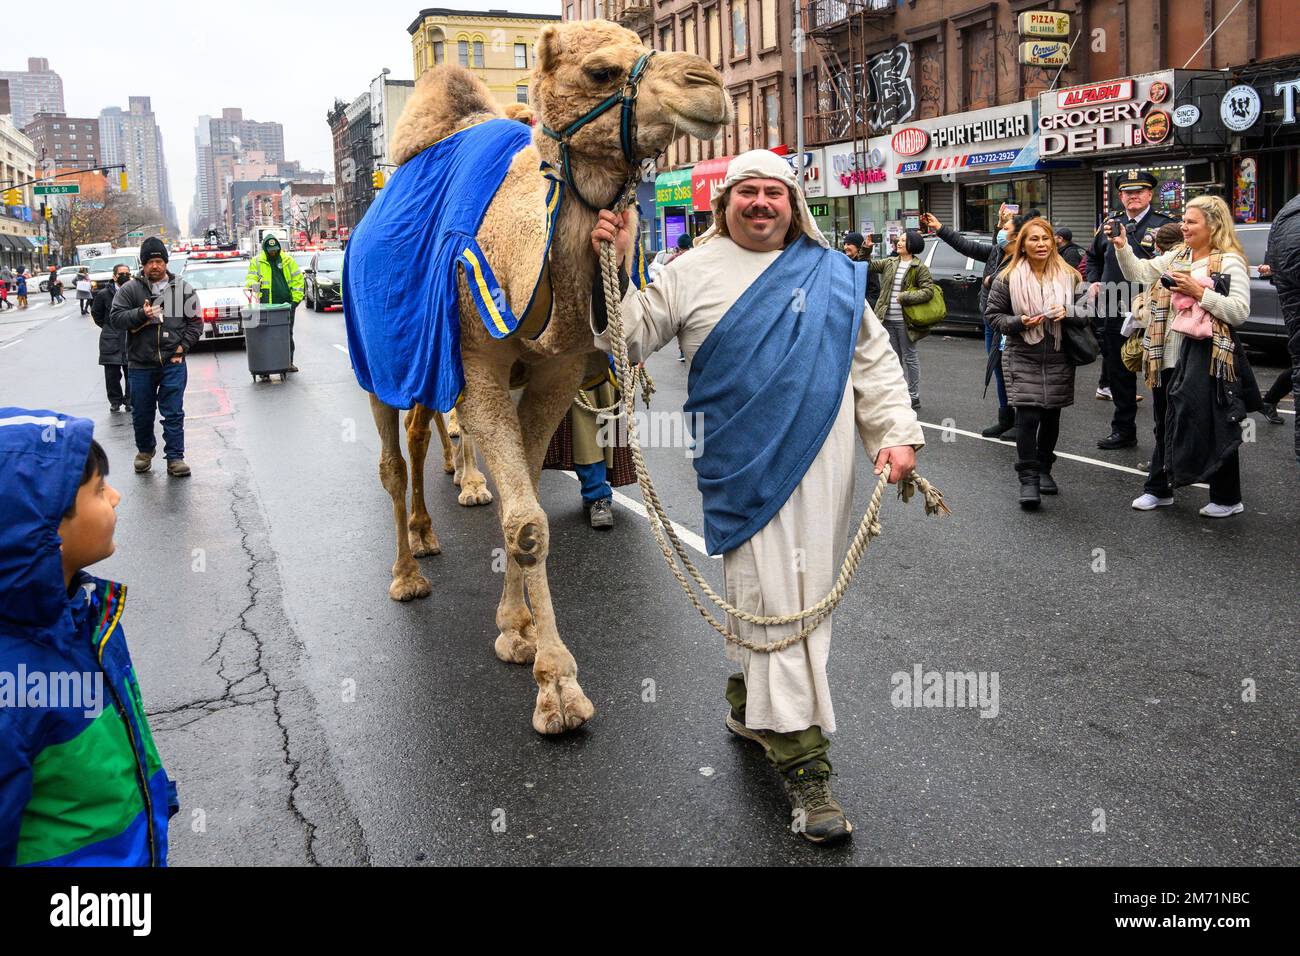 New York, USA. 6th Jan, 2023. A participant leads his camel through the streets in East Harlem during the 46th annual Three Kings Day Parade organized by El Museo del Barrio. The traditional Spanish celebration was held in person for the first time since the start of the coronavirus (COVID-19) pandemic. The theme for this year was: 'Entre Familia: Mental Health & Wellness of our Communities' focusing on the importance of mental health and wellness. Credit: Enrique Shore/Alamy Live News Stock Photo